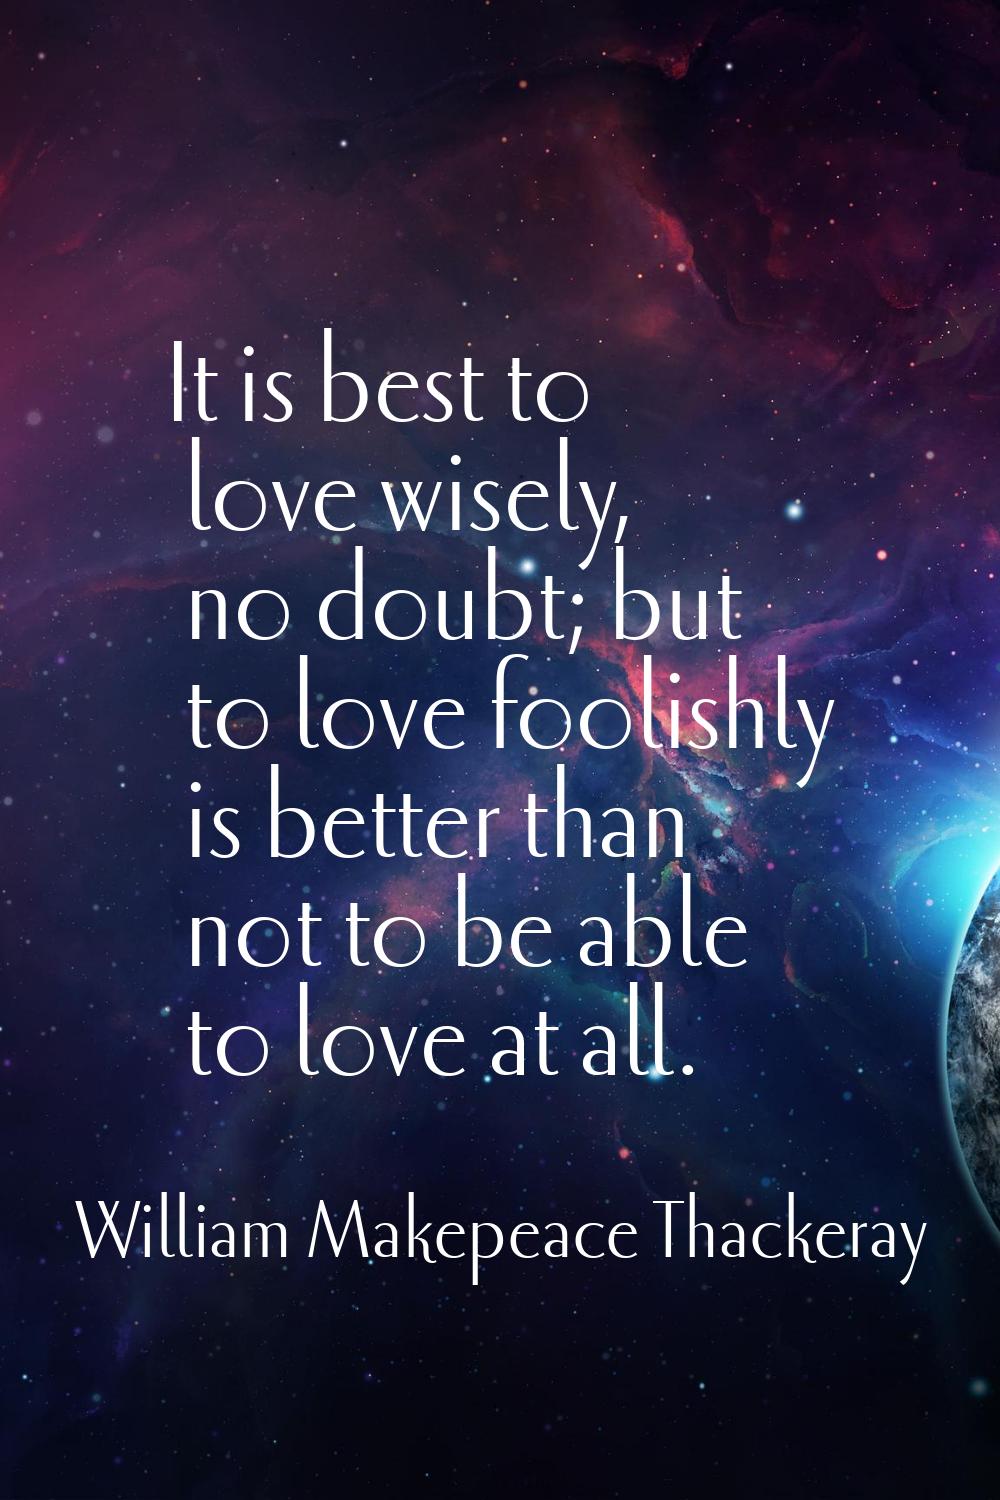 It is best to love wisely, no doubt; but to love foolishly is better than not to be able to love at